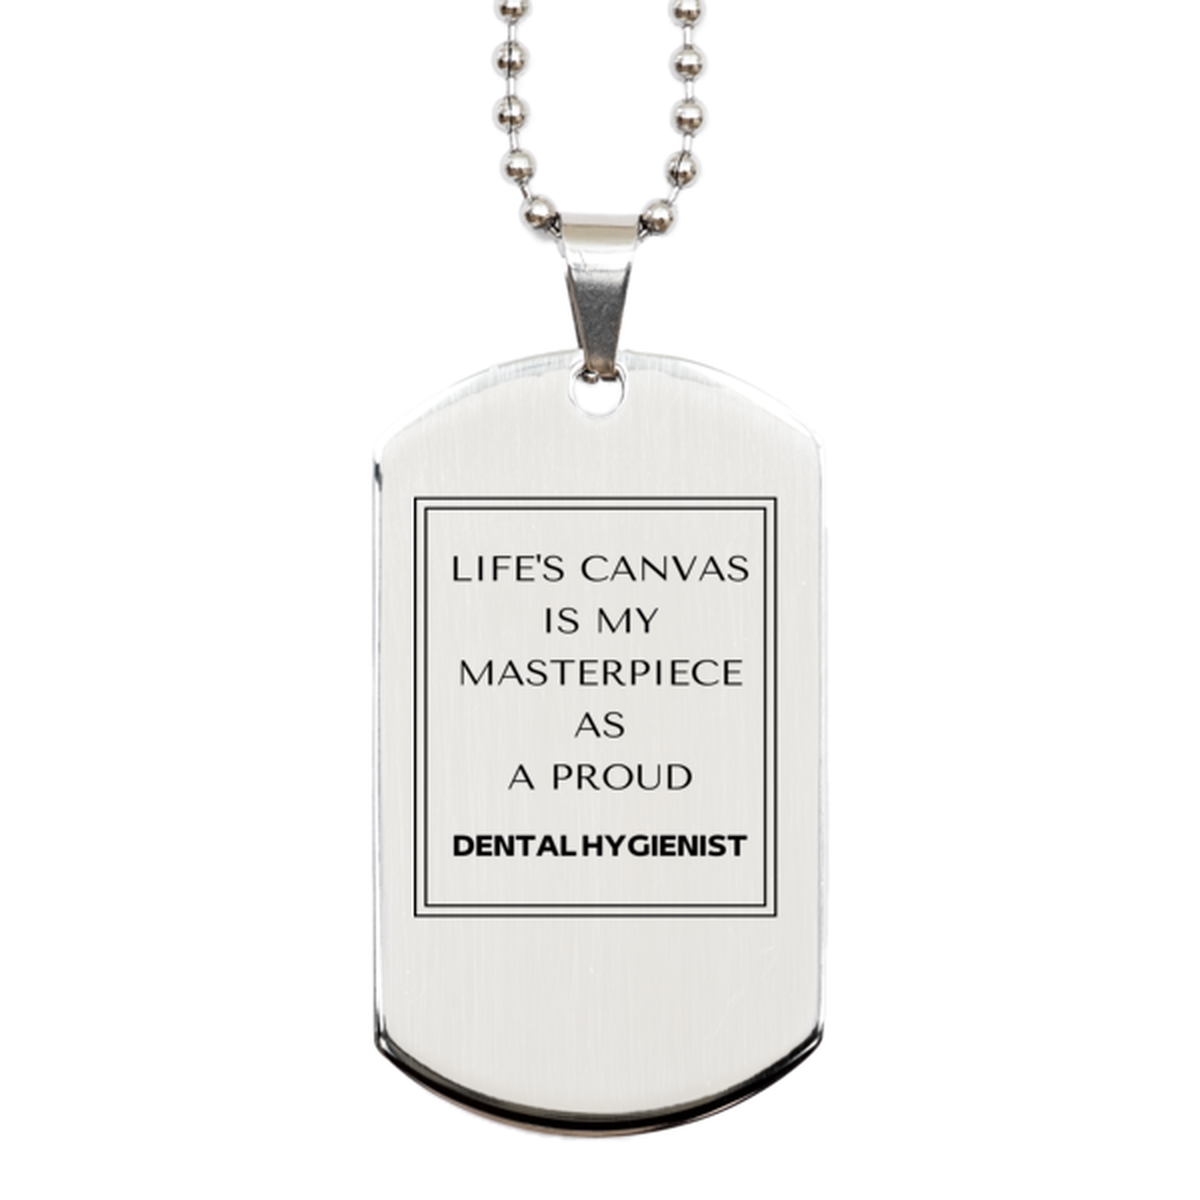 Proud Dental Hygienist Gifts, Life's canvas is my masterpiece, Epic Birthday Christmas Unique Silver Dog Tag For Dental Hygienist, Coworkers, Men, Women, Friends